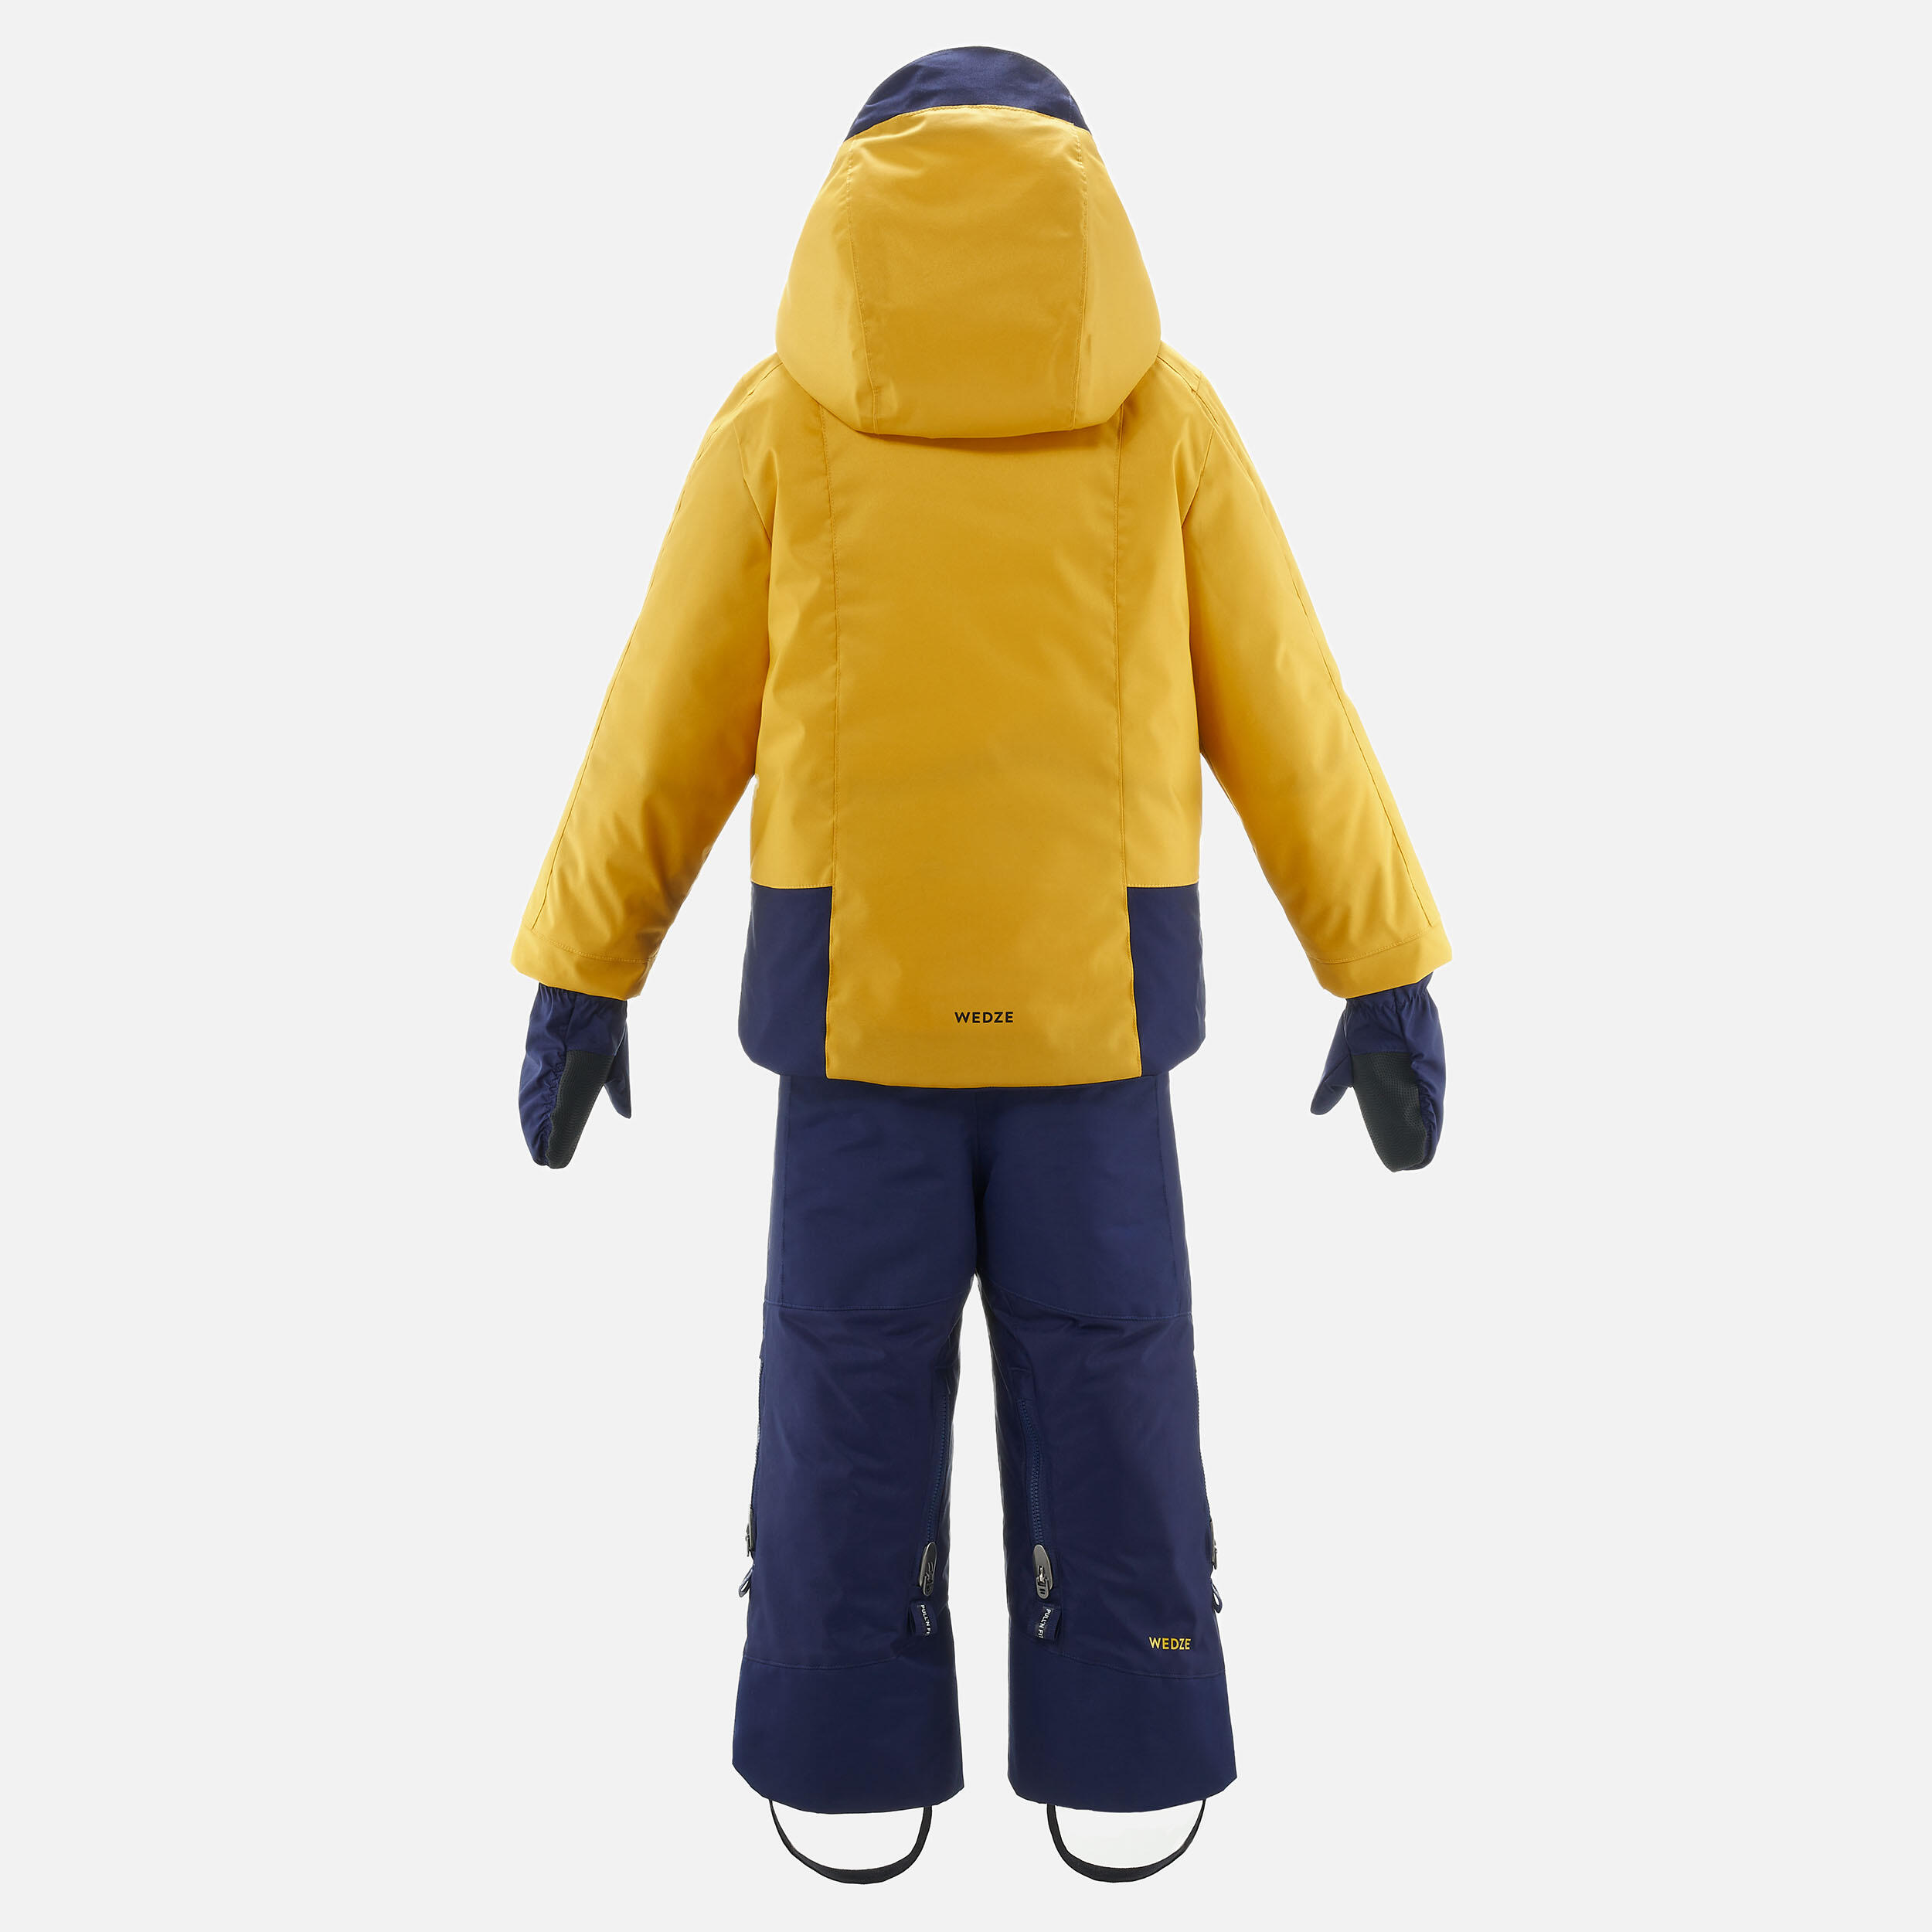 Kids’ Warm and Waterproof Ski Suit 580 - Yellow and Blue 2/15